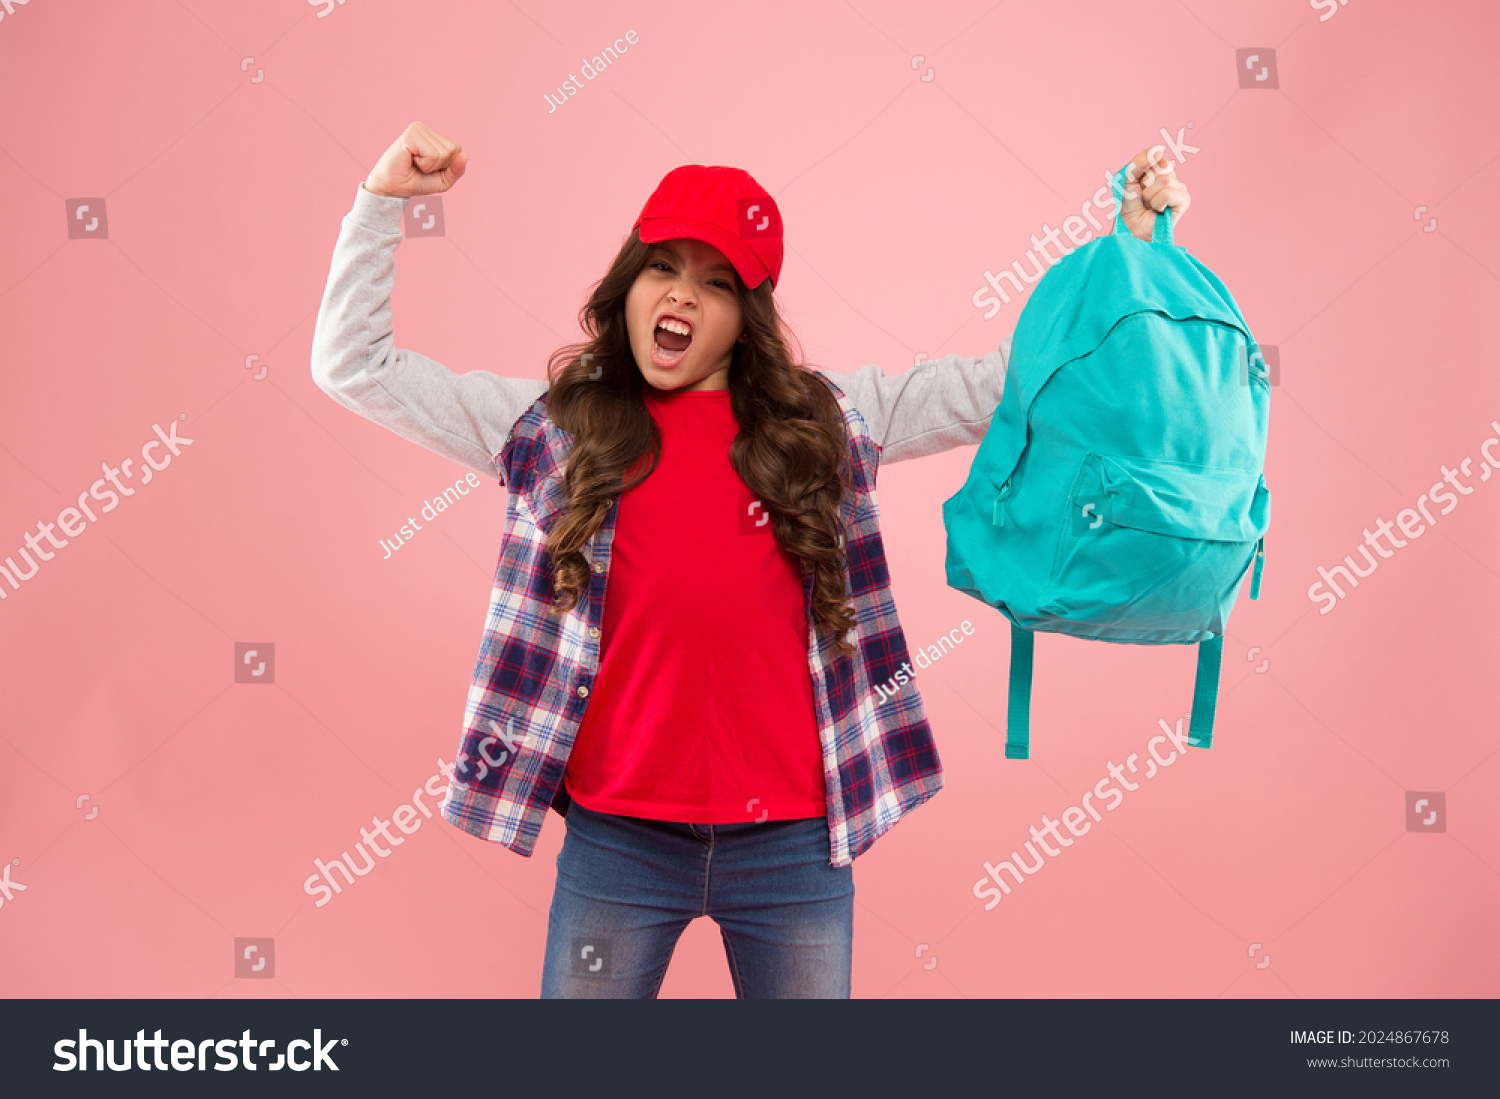 Powerful kid. Carrying things in backpack. Learn how fit backpack correctly. Girl little fashionable kid carry backpack. Useful fashion accessory. Schoolgirl red cap long hair with school backpack #2024867678